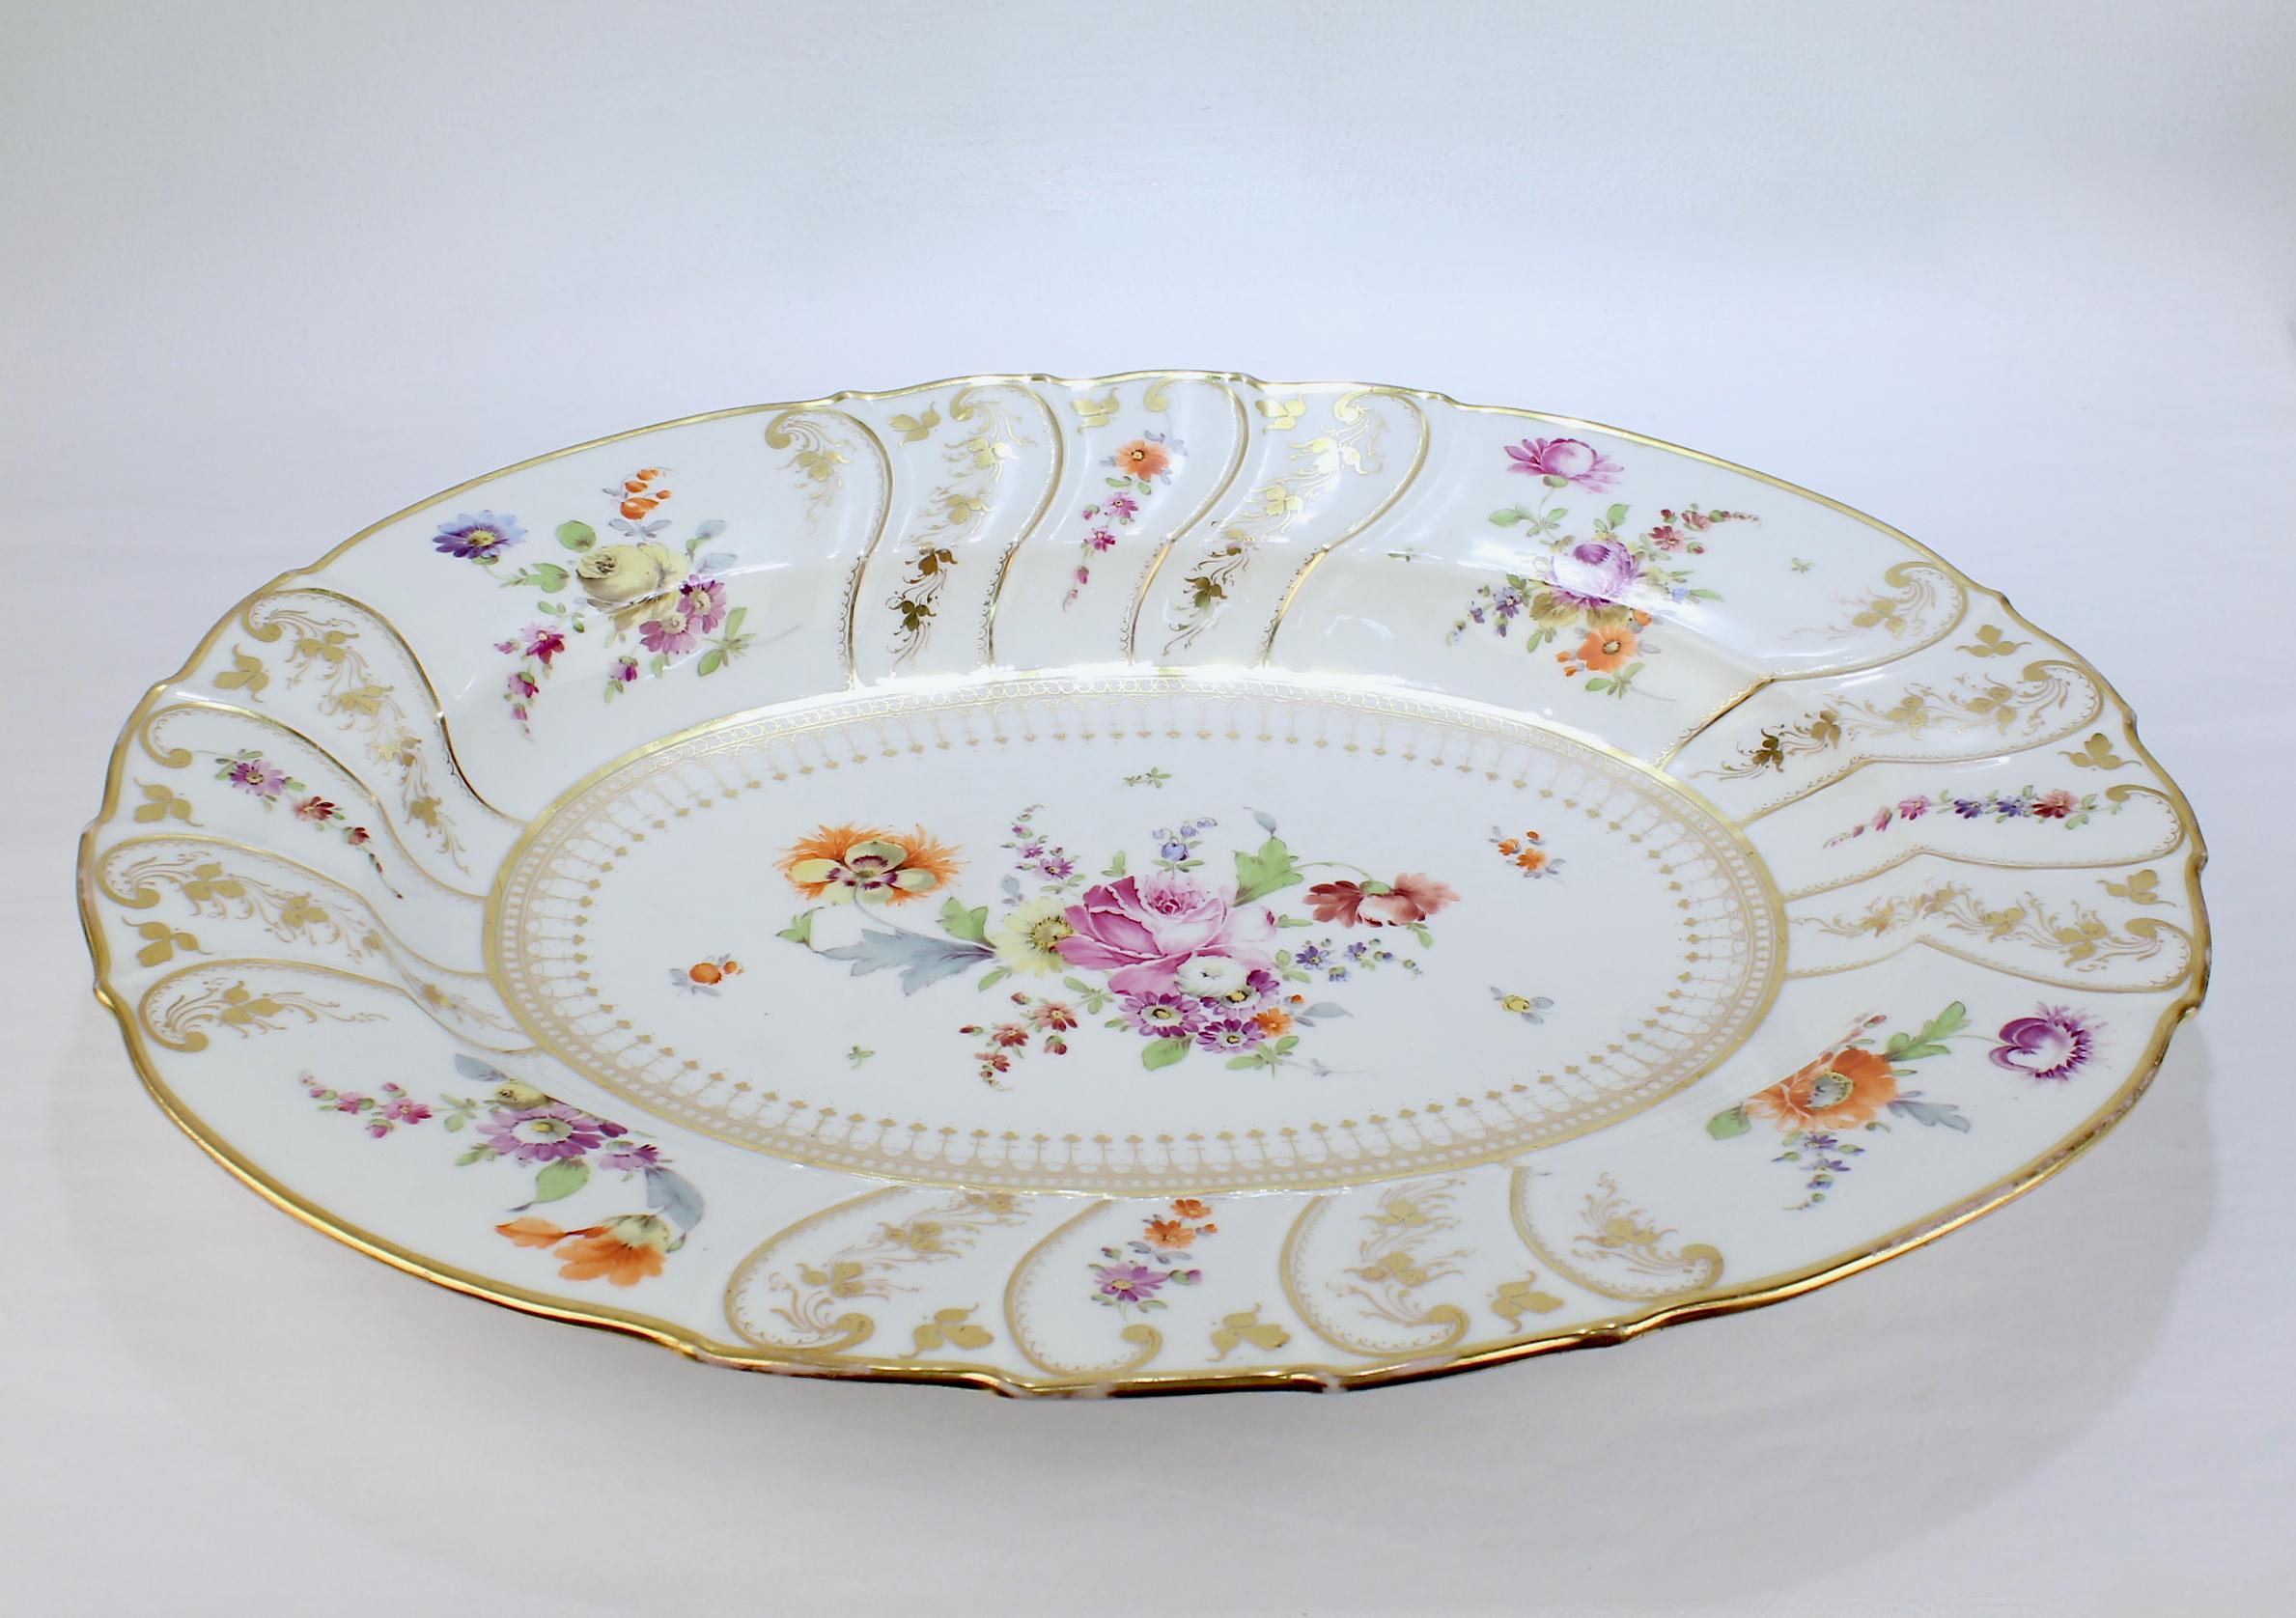 A fine and large Dresden porcelain tray or platter by Richard Klemm. 

With a ribbed, scalloped border and deep central well.

Richly decorated with hand painted 'Deutsche Blumen' style flowers.

Simply a wonderful piece of porcelain!

Date: